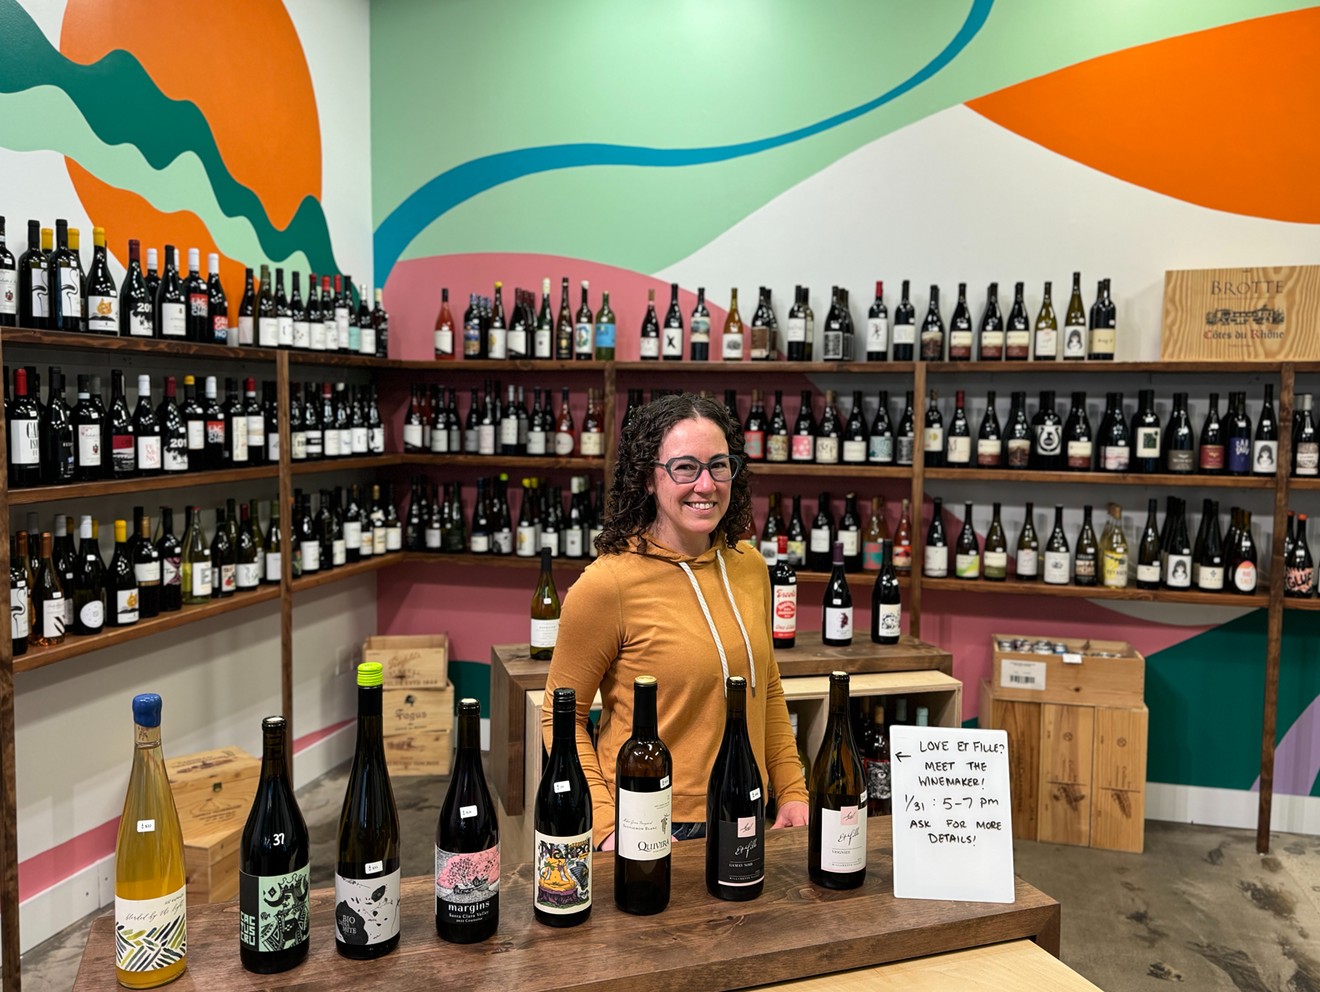 Corianne Nelson knows that wine can be intimidating so she set out to create an inviting space to learn, taste and shop at her downtown bottle shop Unfiltered Natural Wine and More.